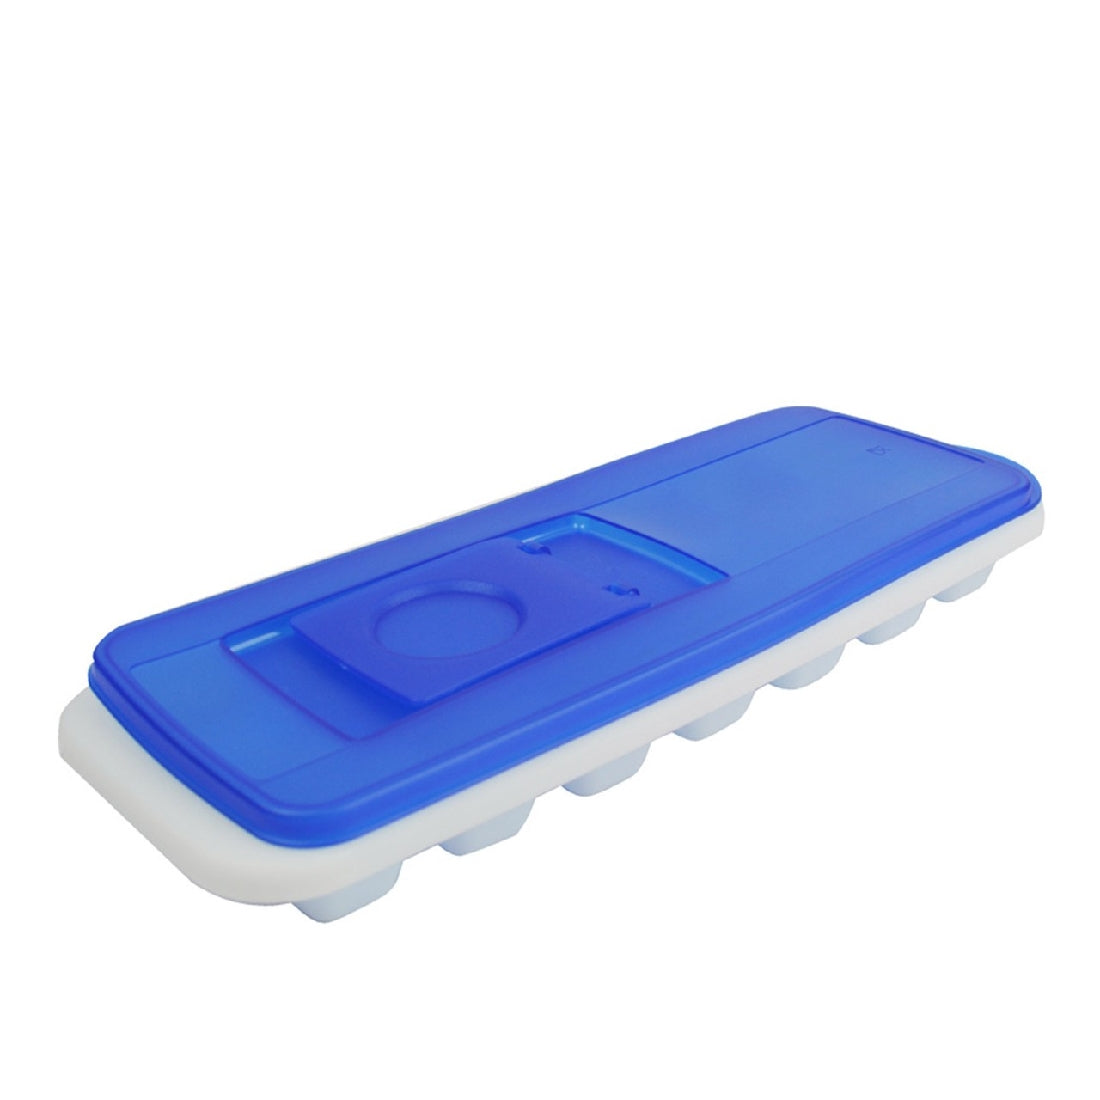 Avanti Ice Cube Tray With Pour Through Lid - Blue/white